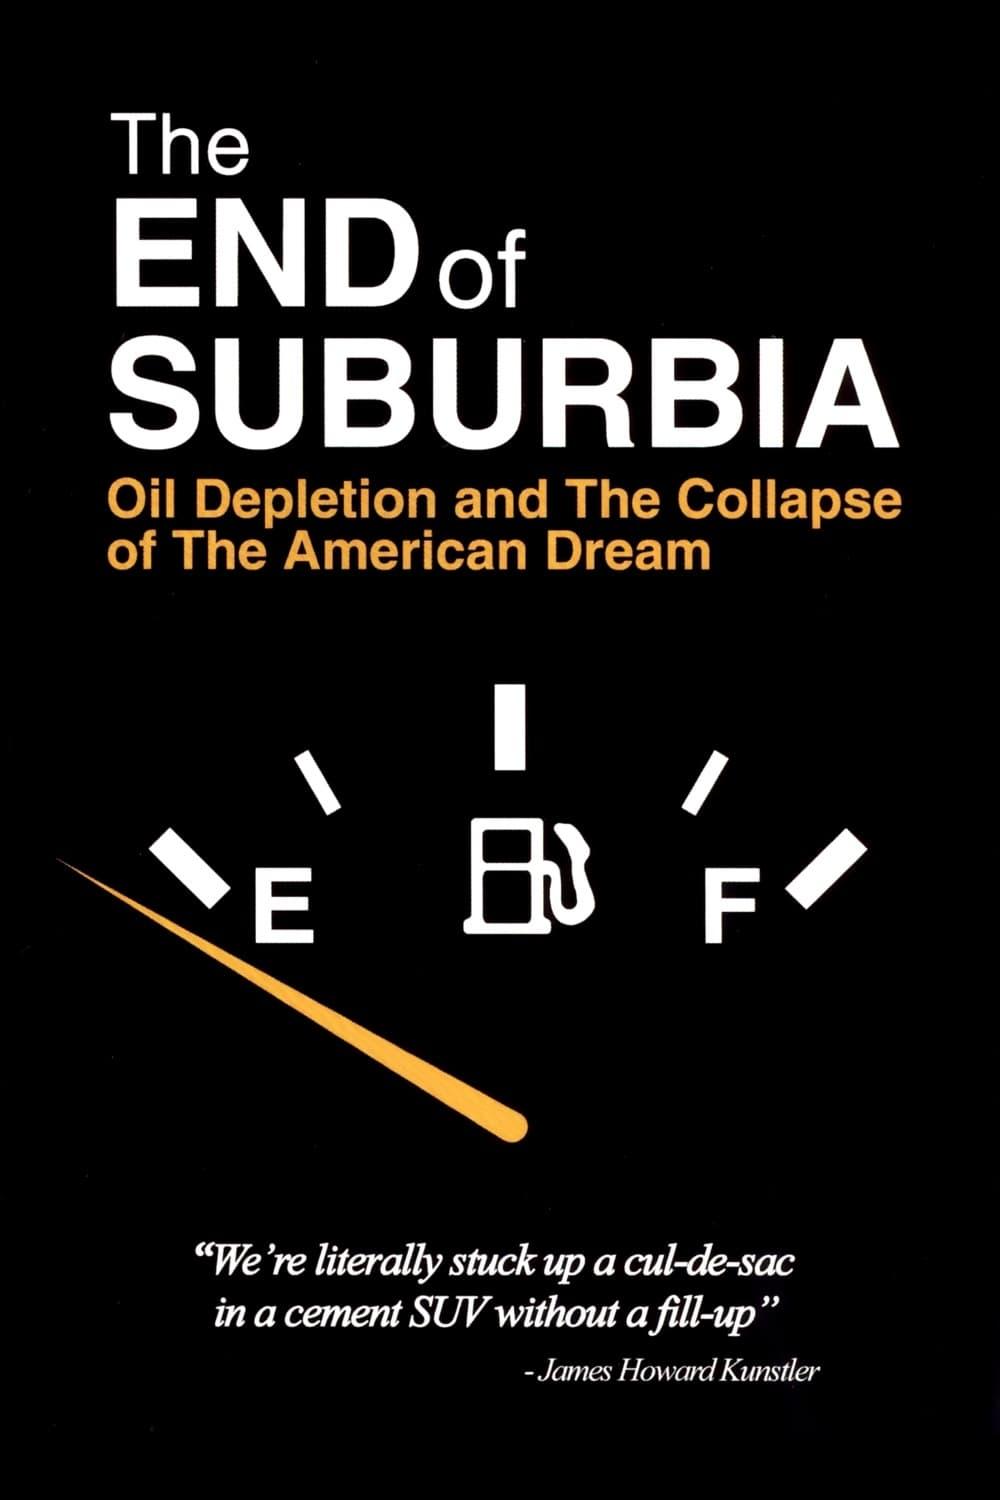 The End of Suburbia: Oil Depletion and the Collapse of the American Dream poster